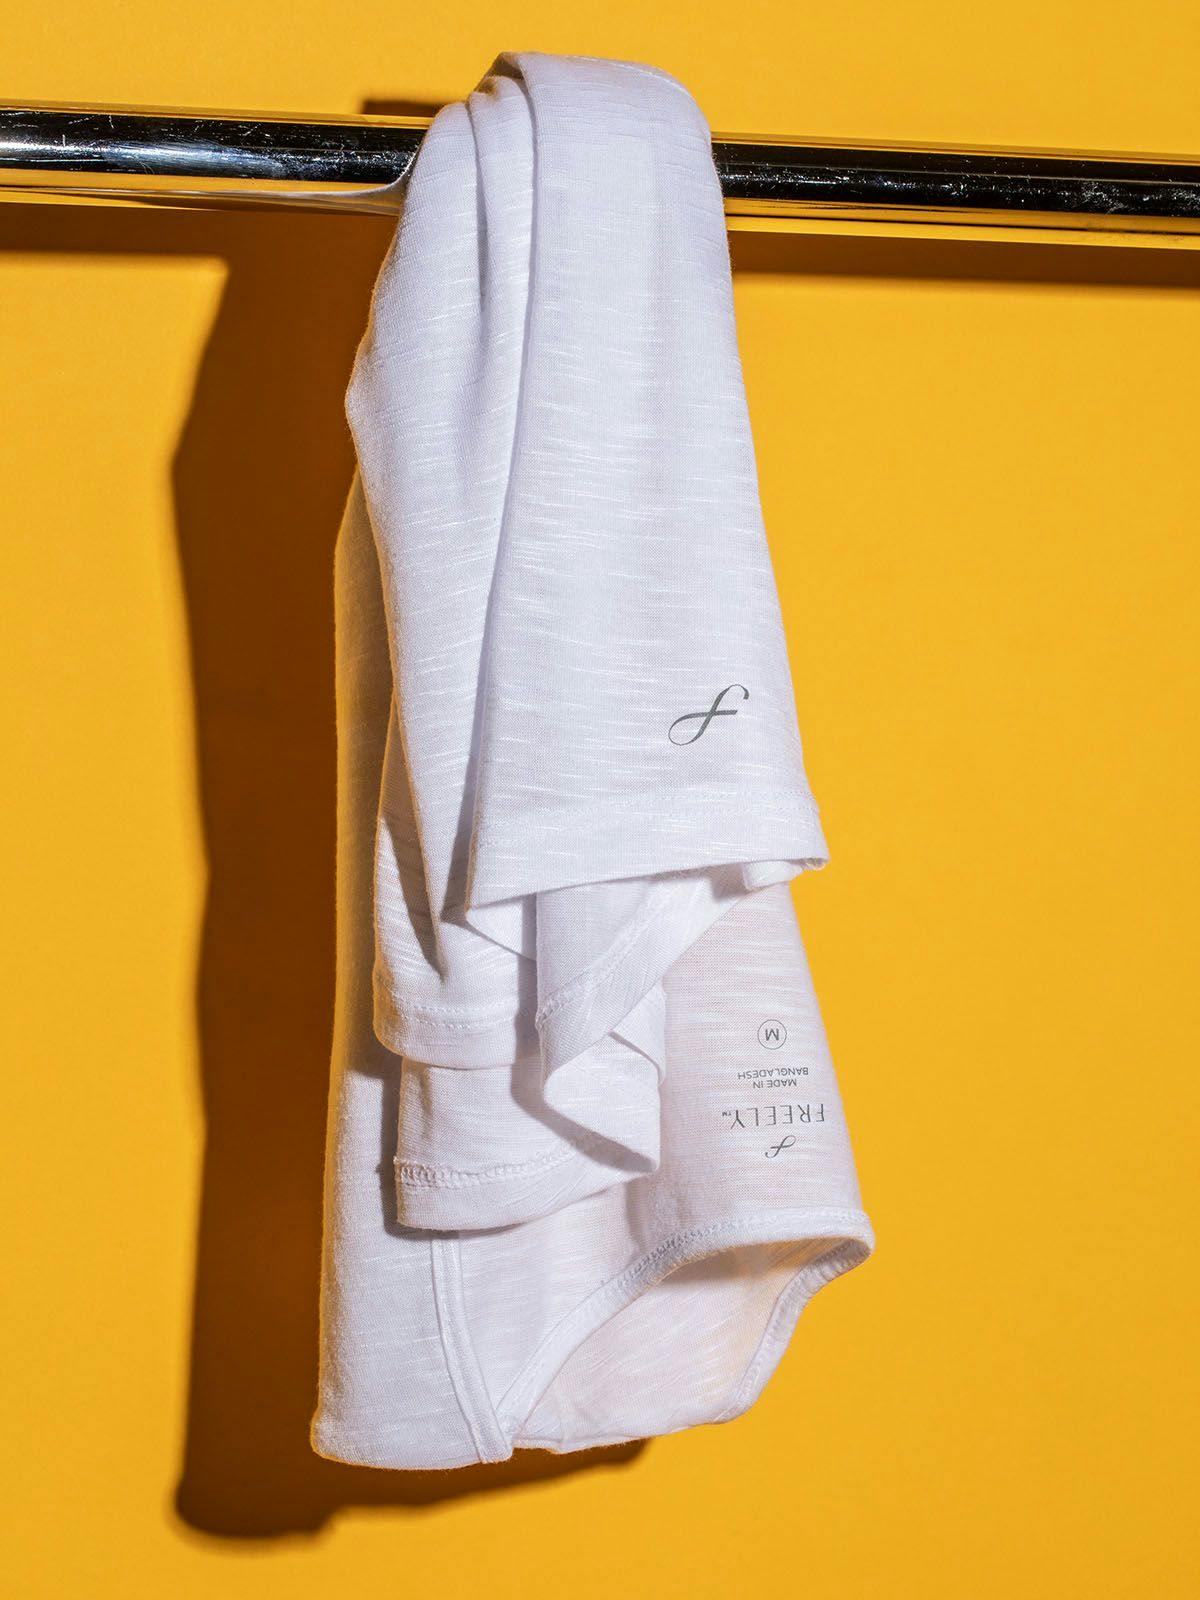 White Shirt Hanging on a Clothing Rack Against a Yellow Wall